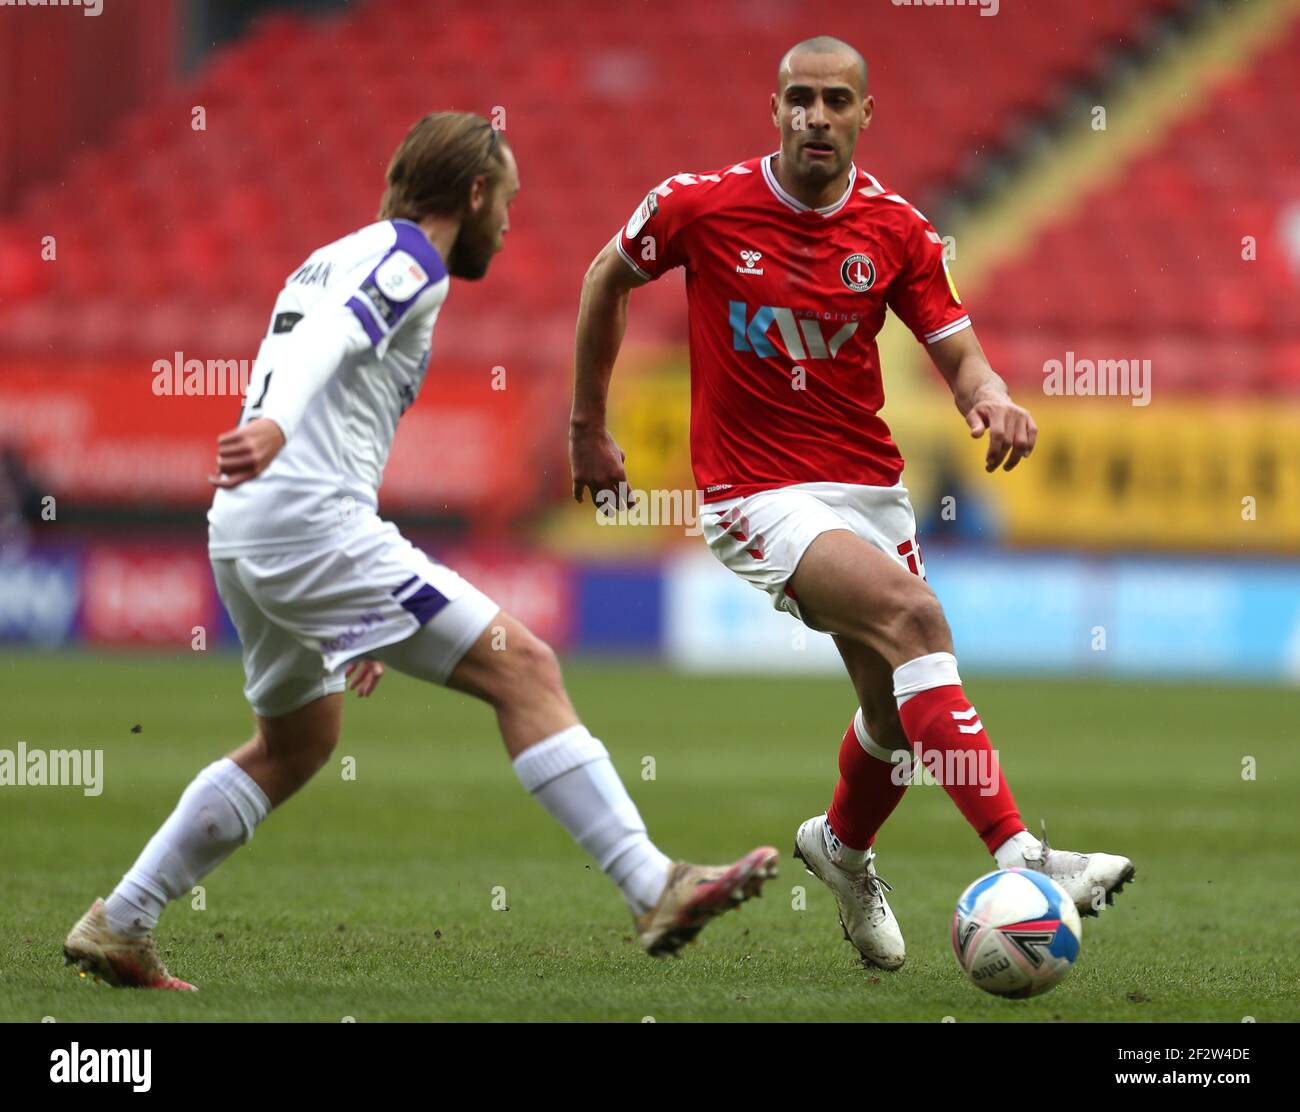 Shrewsbury Town's Harry Chapman (left) and Charlton Athletic's Darren Pratley battle for the ball during the Sky Bet League One match at The Valley, London. Stock Photo